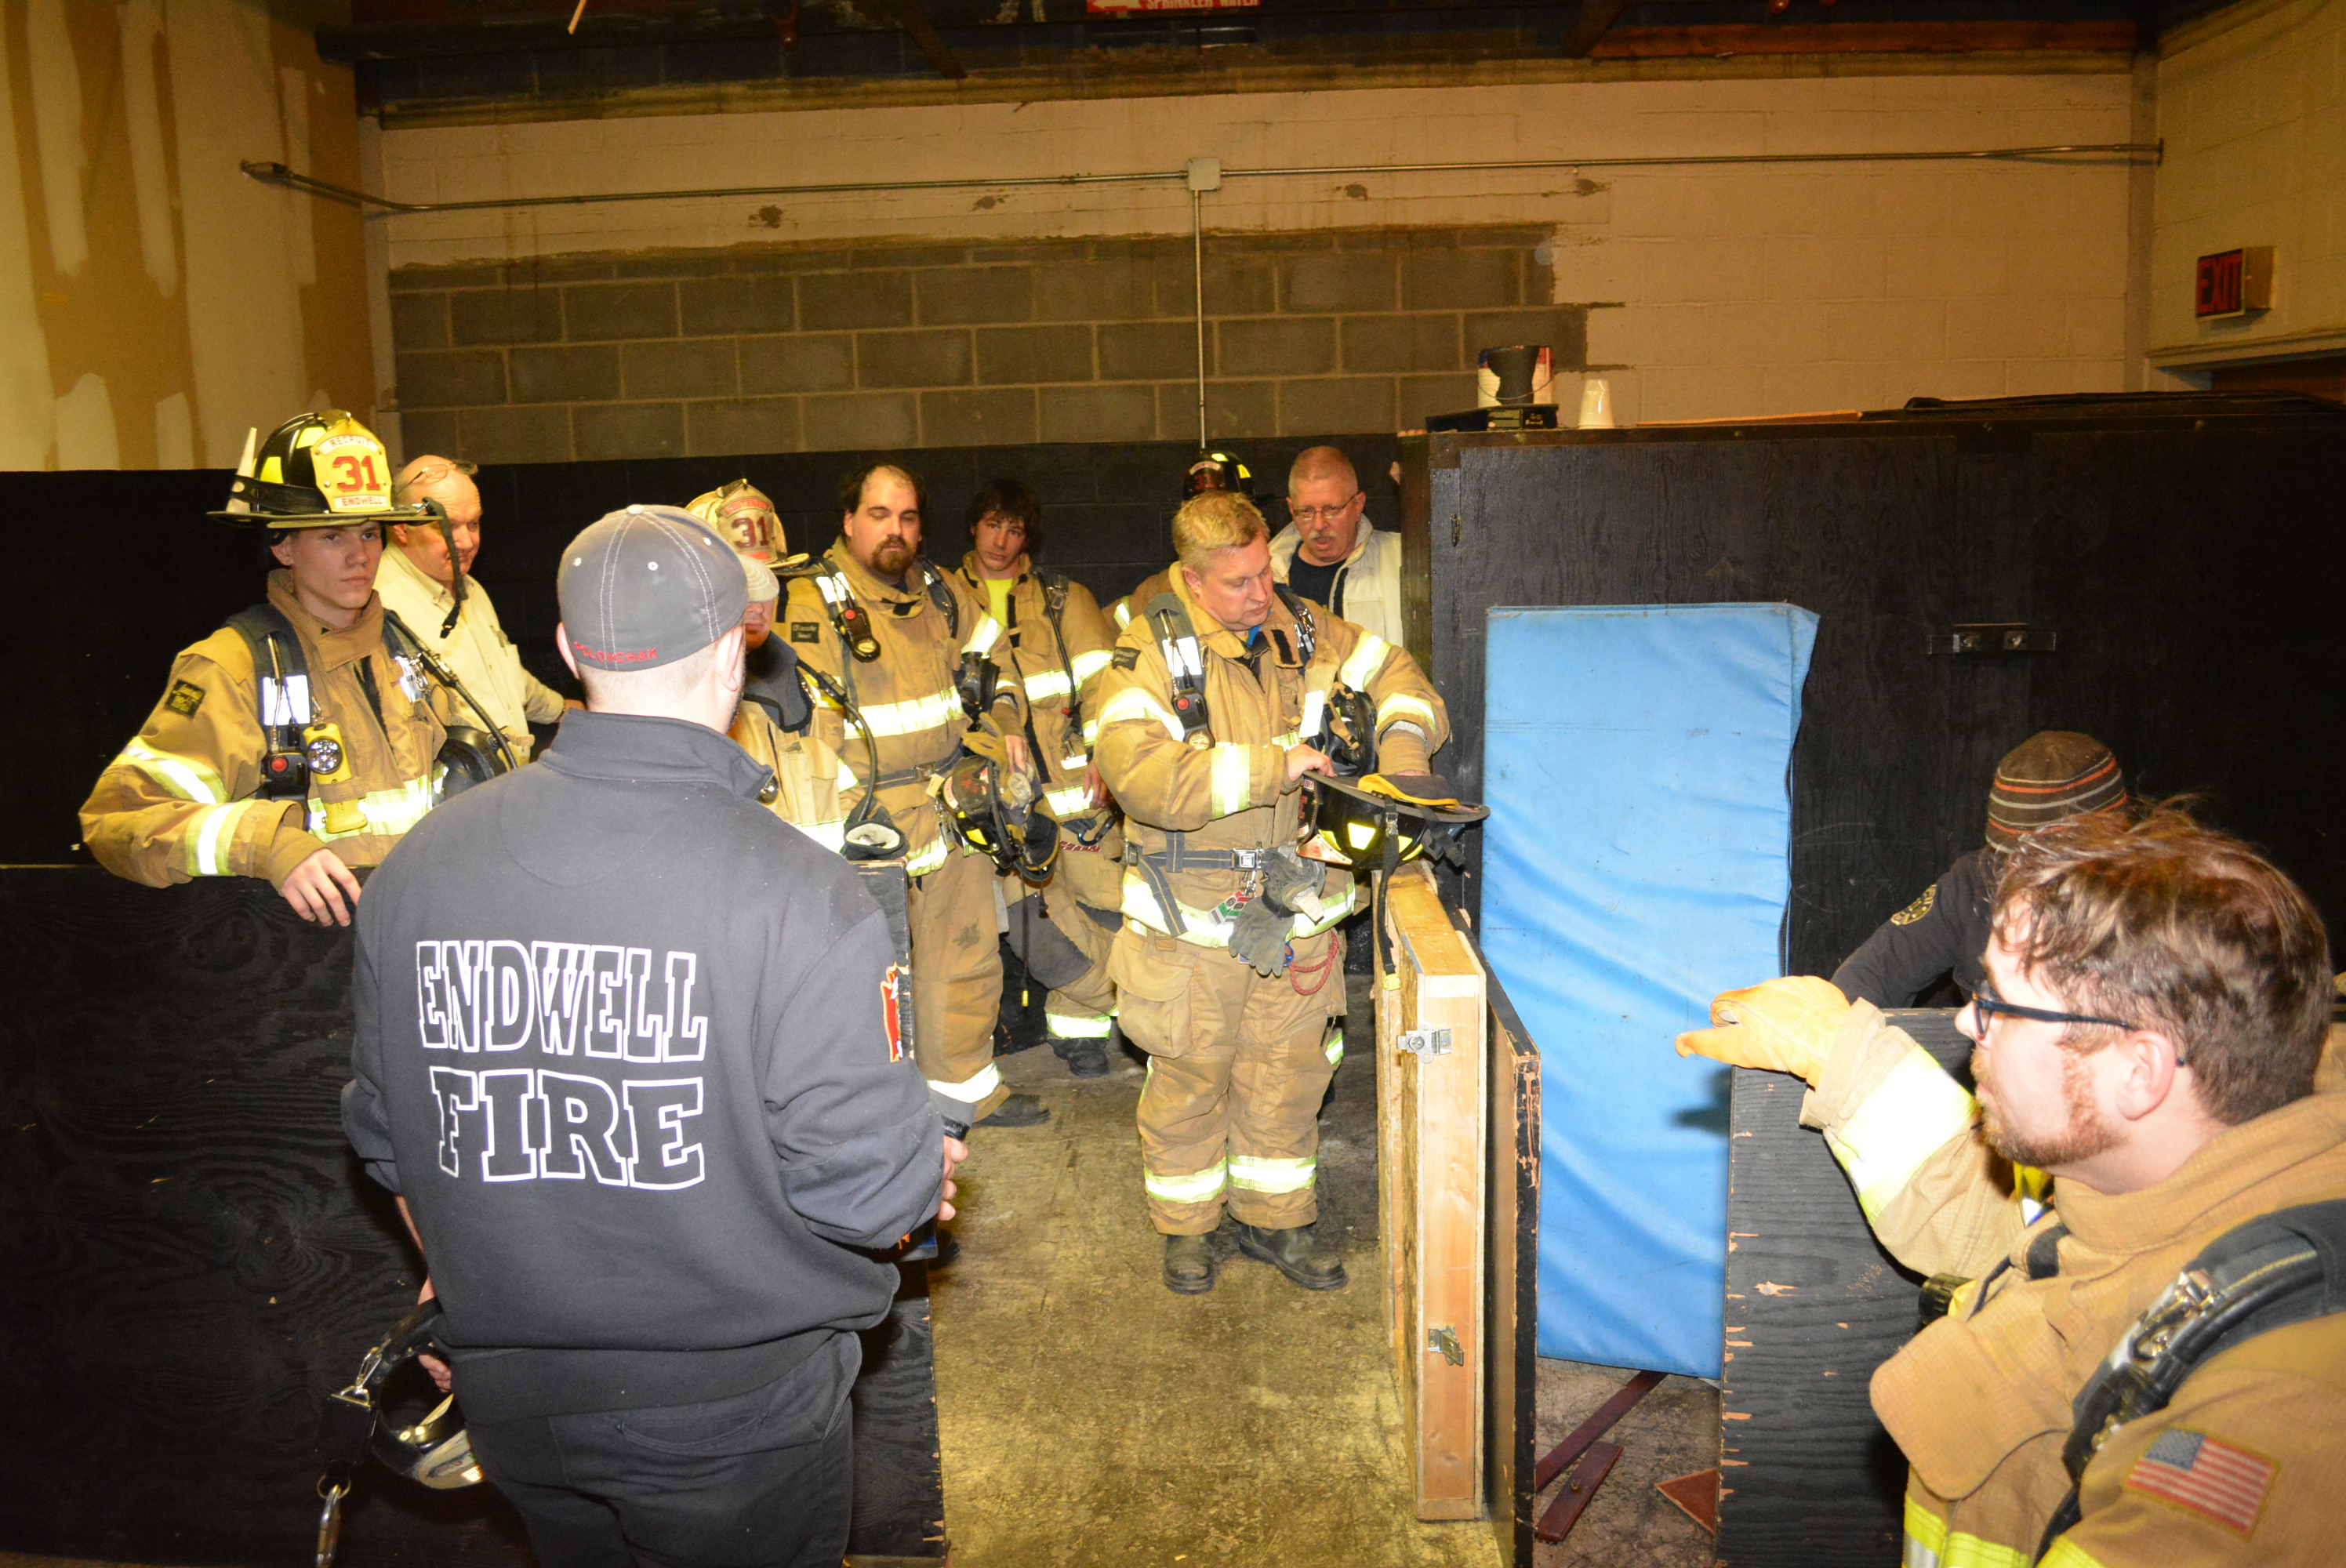 02-13-17  Training - Thermal Cams